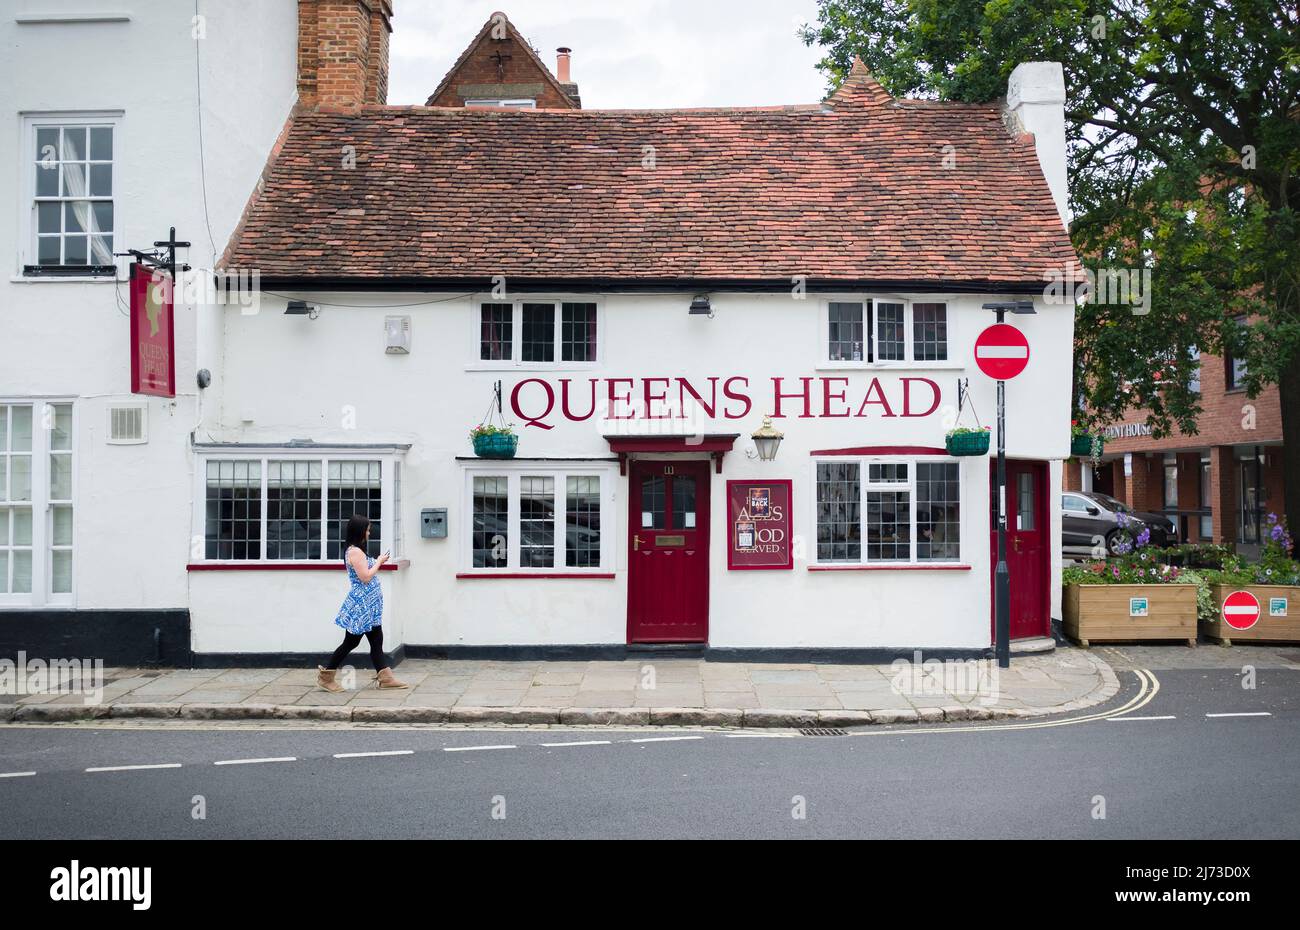 AYLESBURY, UK - July 01, 2021. Exterior of old traditional English pub, The Queens Head. Street scene outside public house. Stock Photo